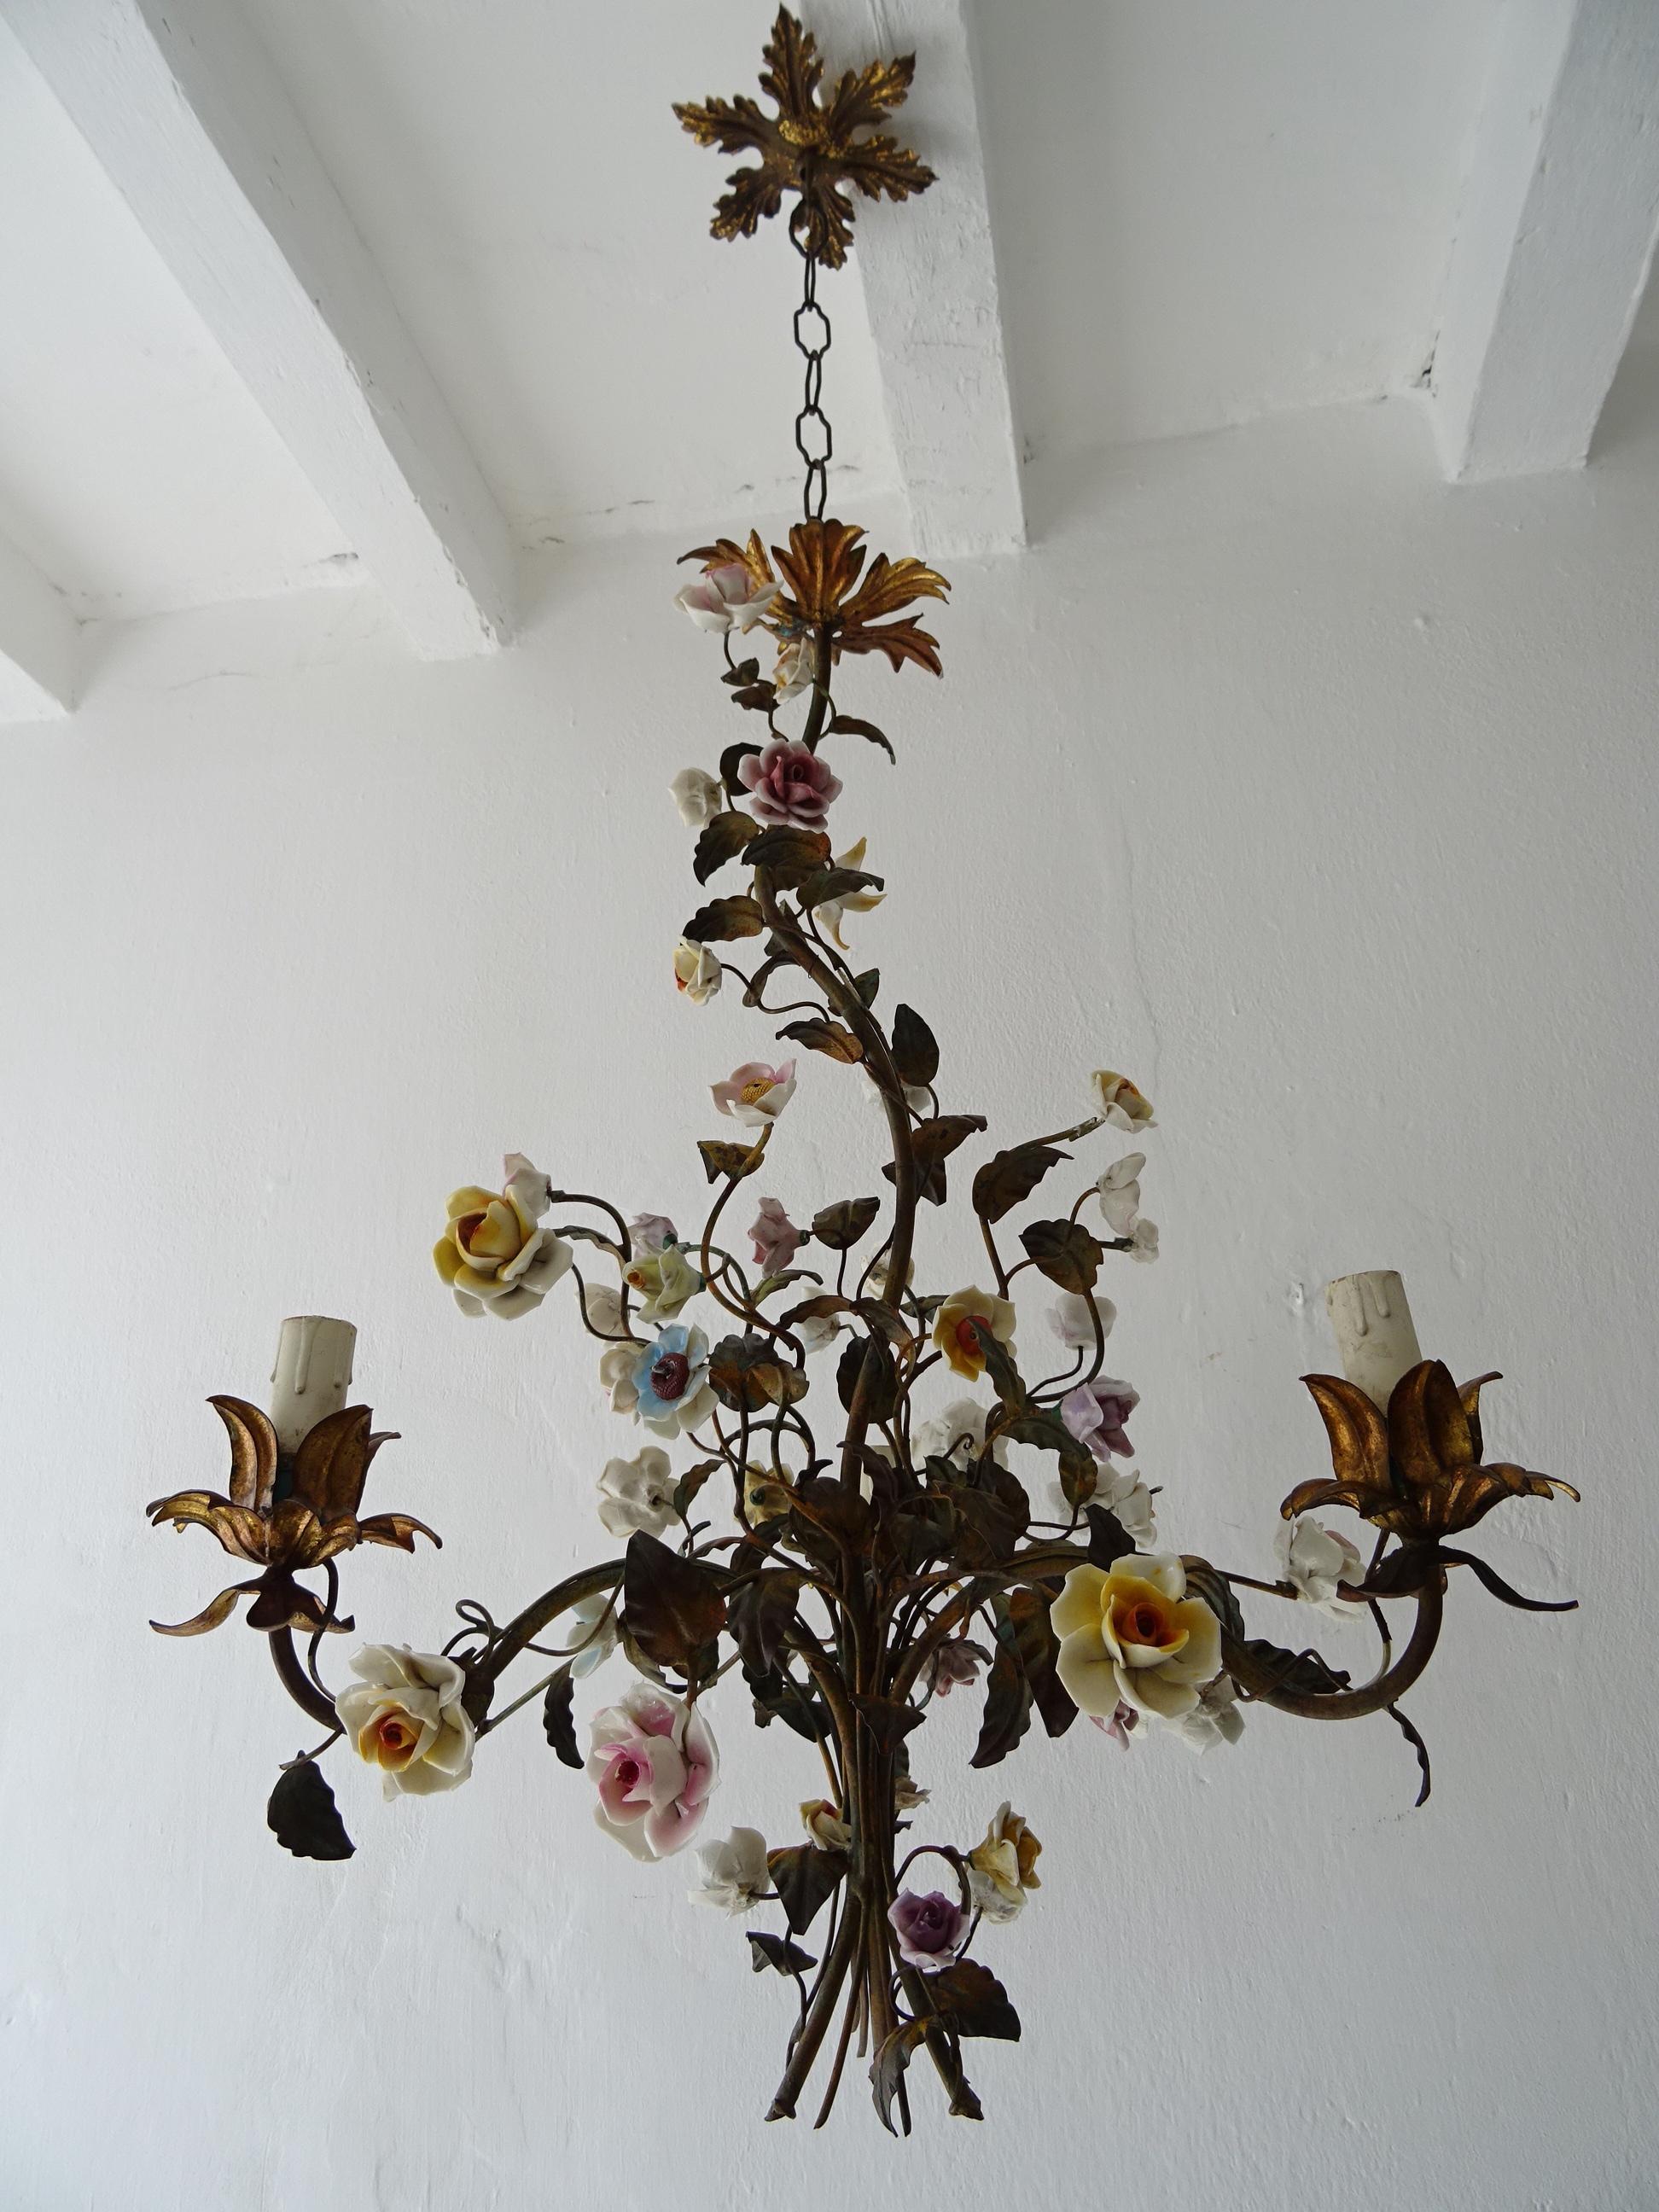 19th Century Italian Tole with Porcelain Flowers Polychrome Chandelier, circa 1870